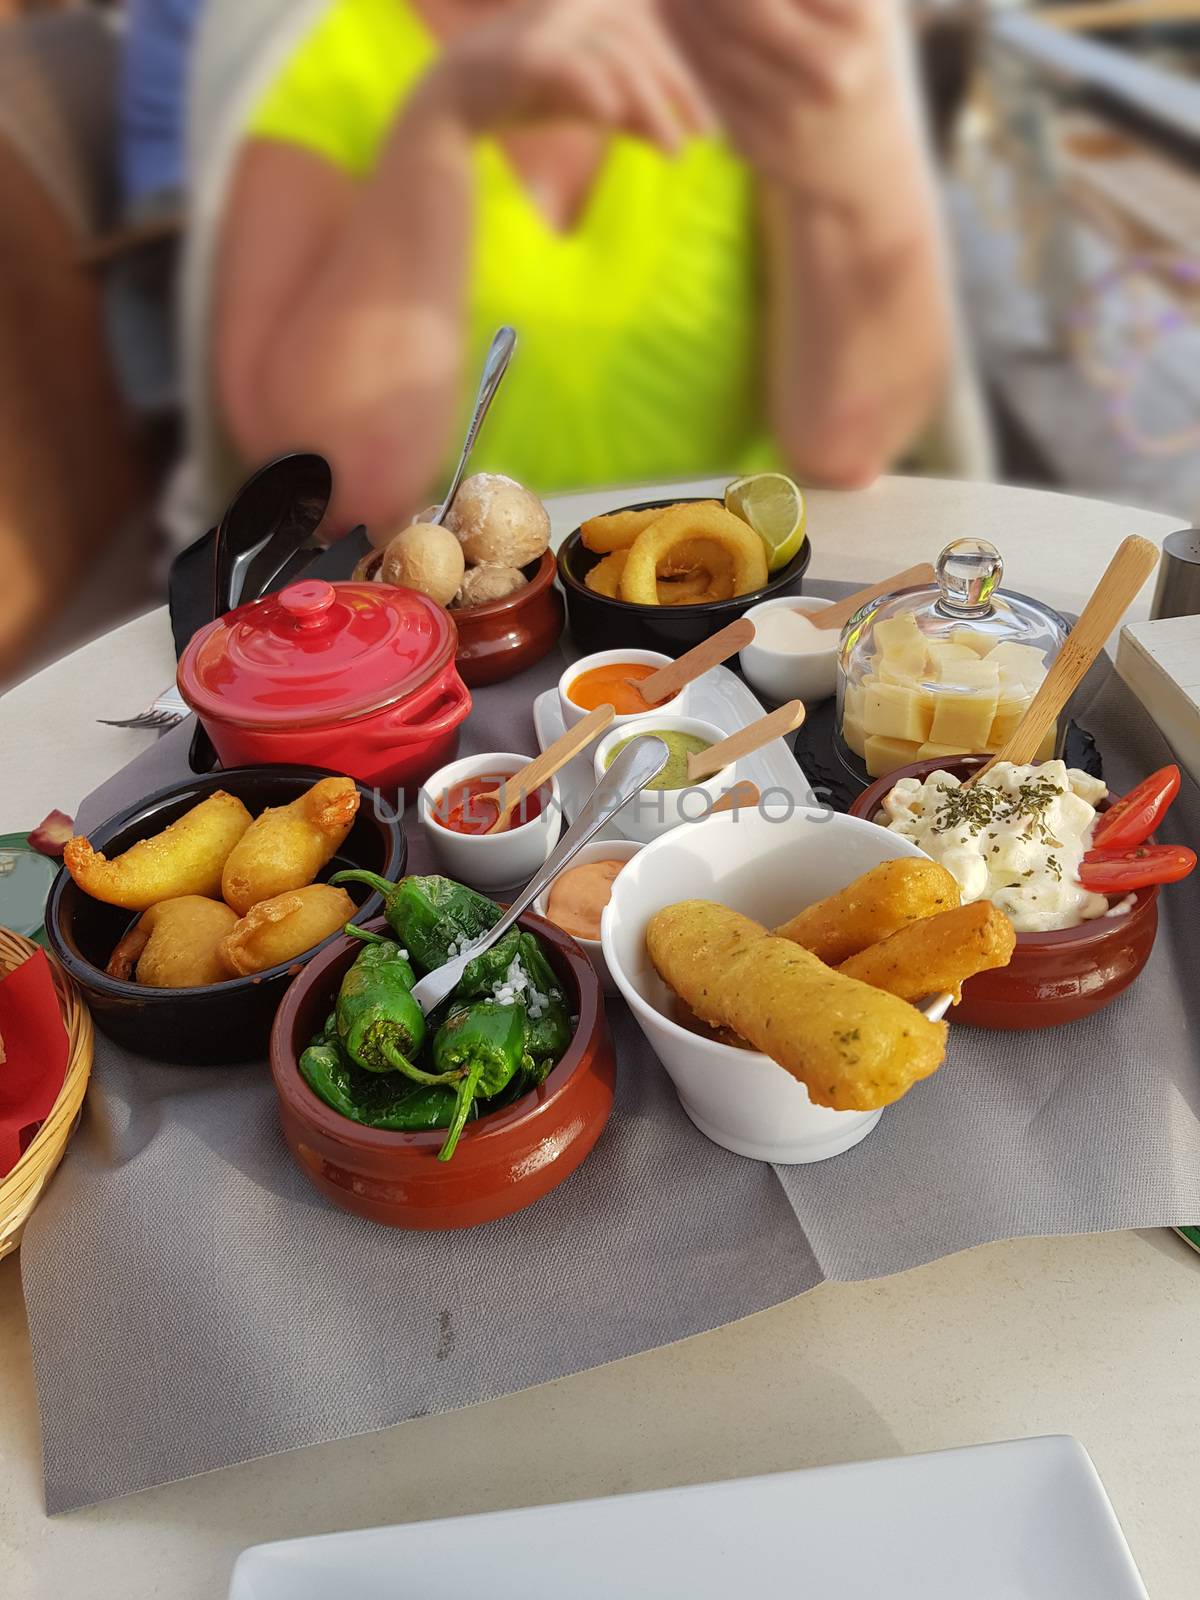 Authentic traditional Spanish tapas for lunch.